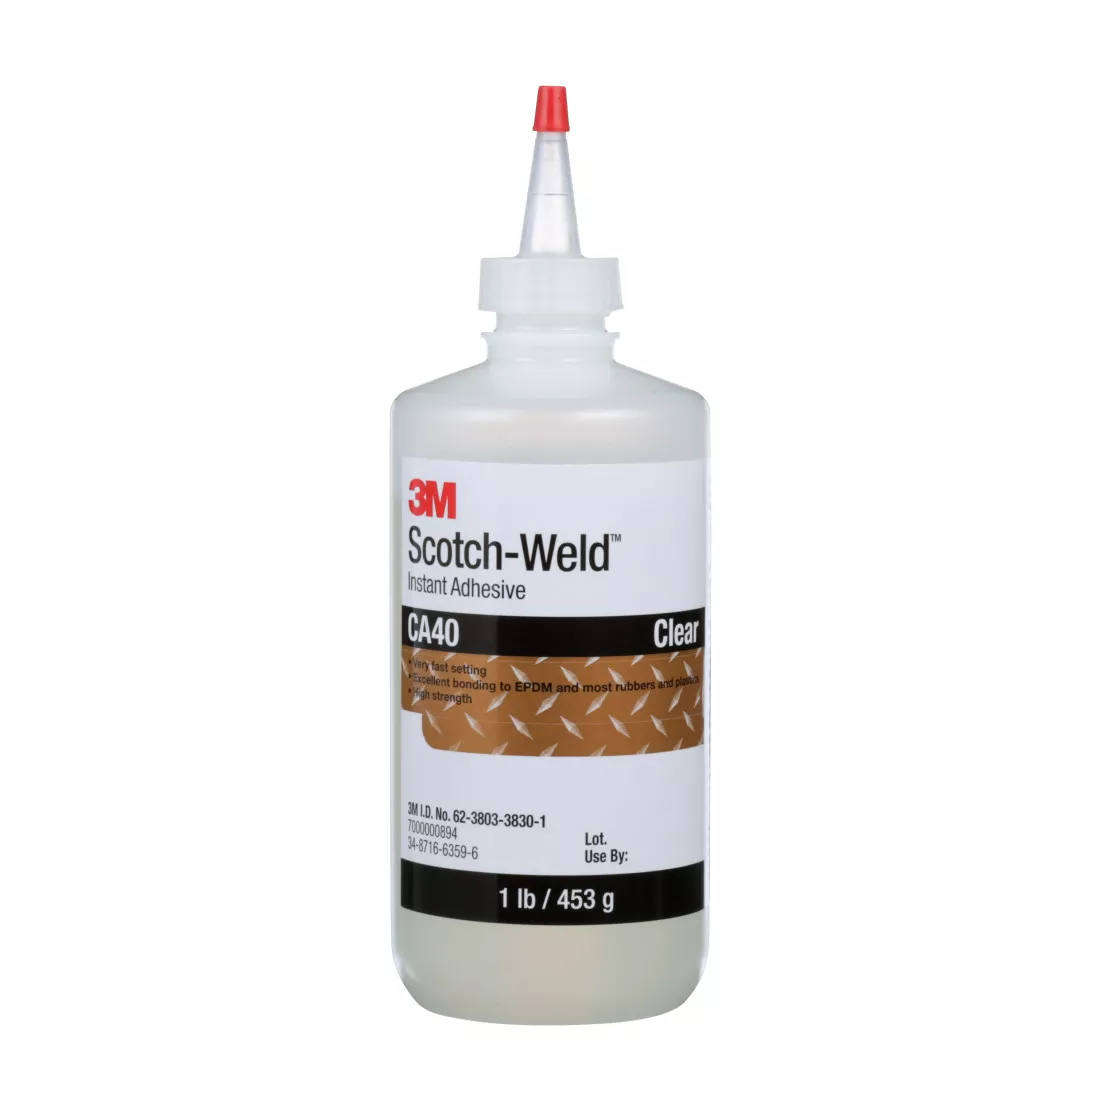 3M™ Scotch-Weld™ Instant Adhesive CA40, Clear, 1 Pound Bottle, 1/case